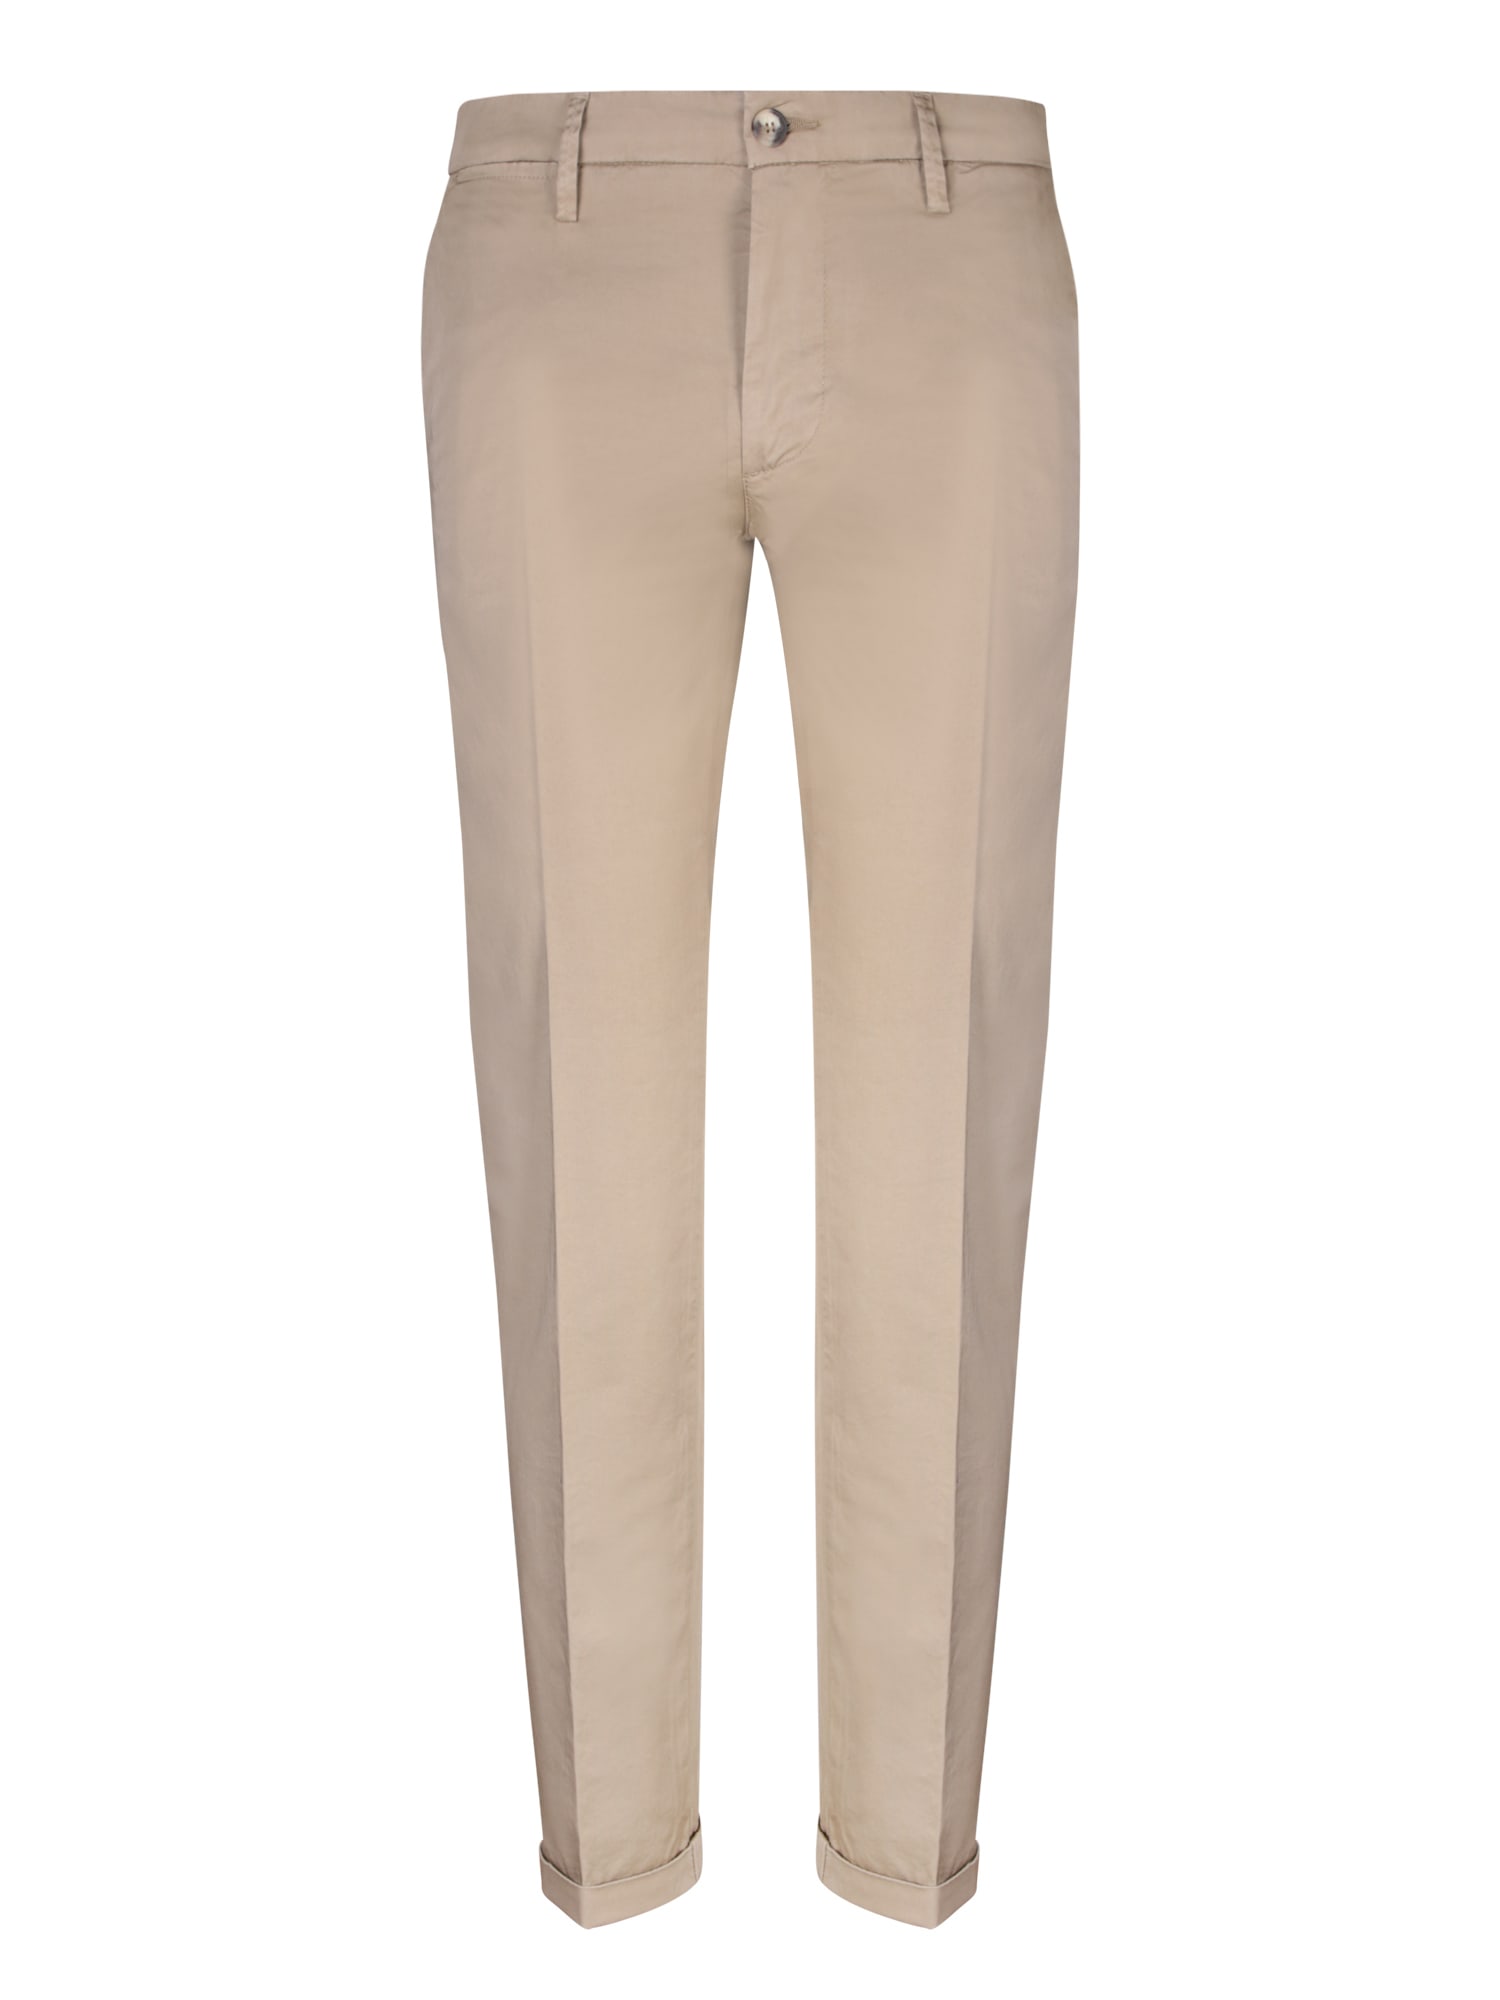 Shop Re-hash Mucha Cotton Brown Trousers